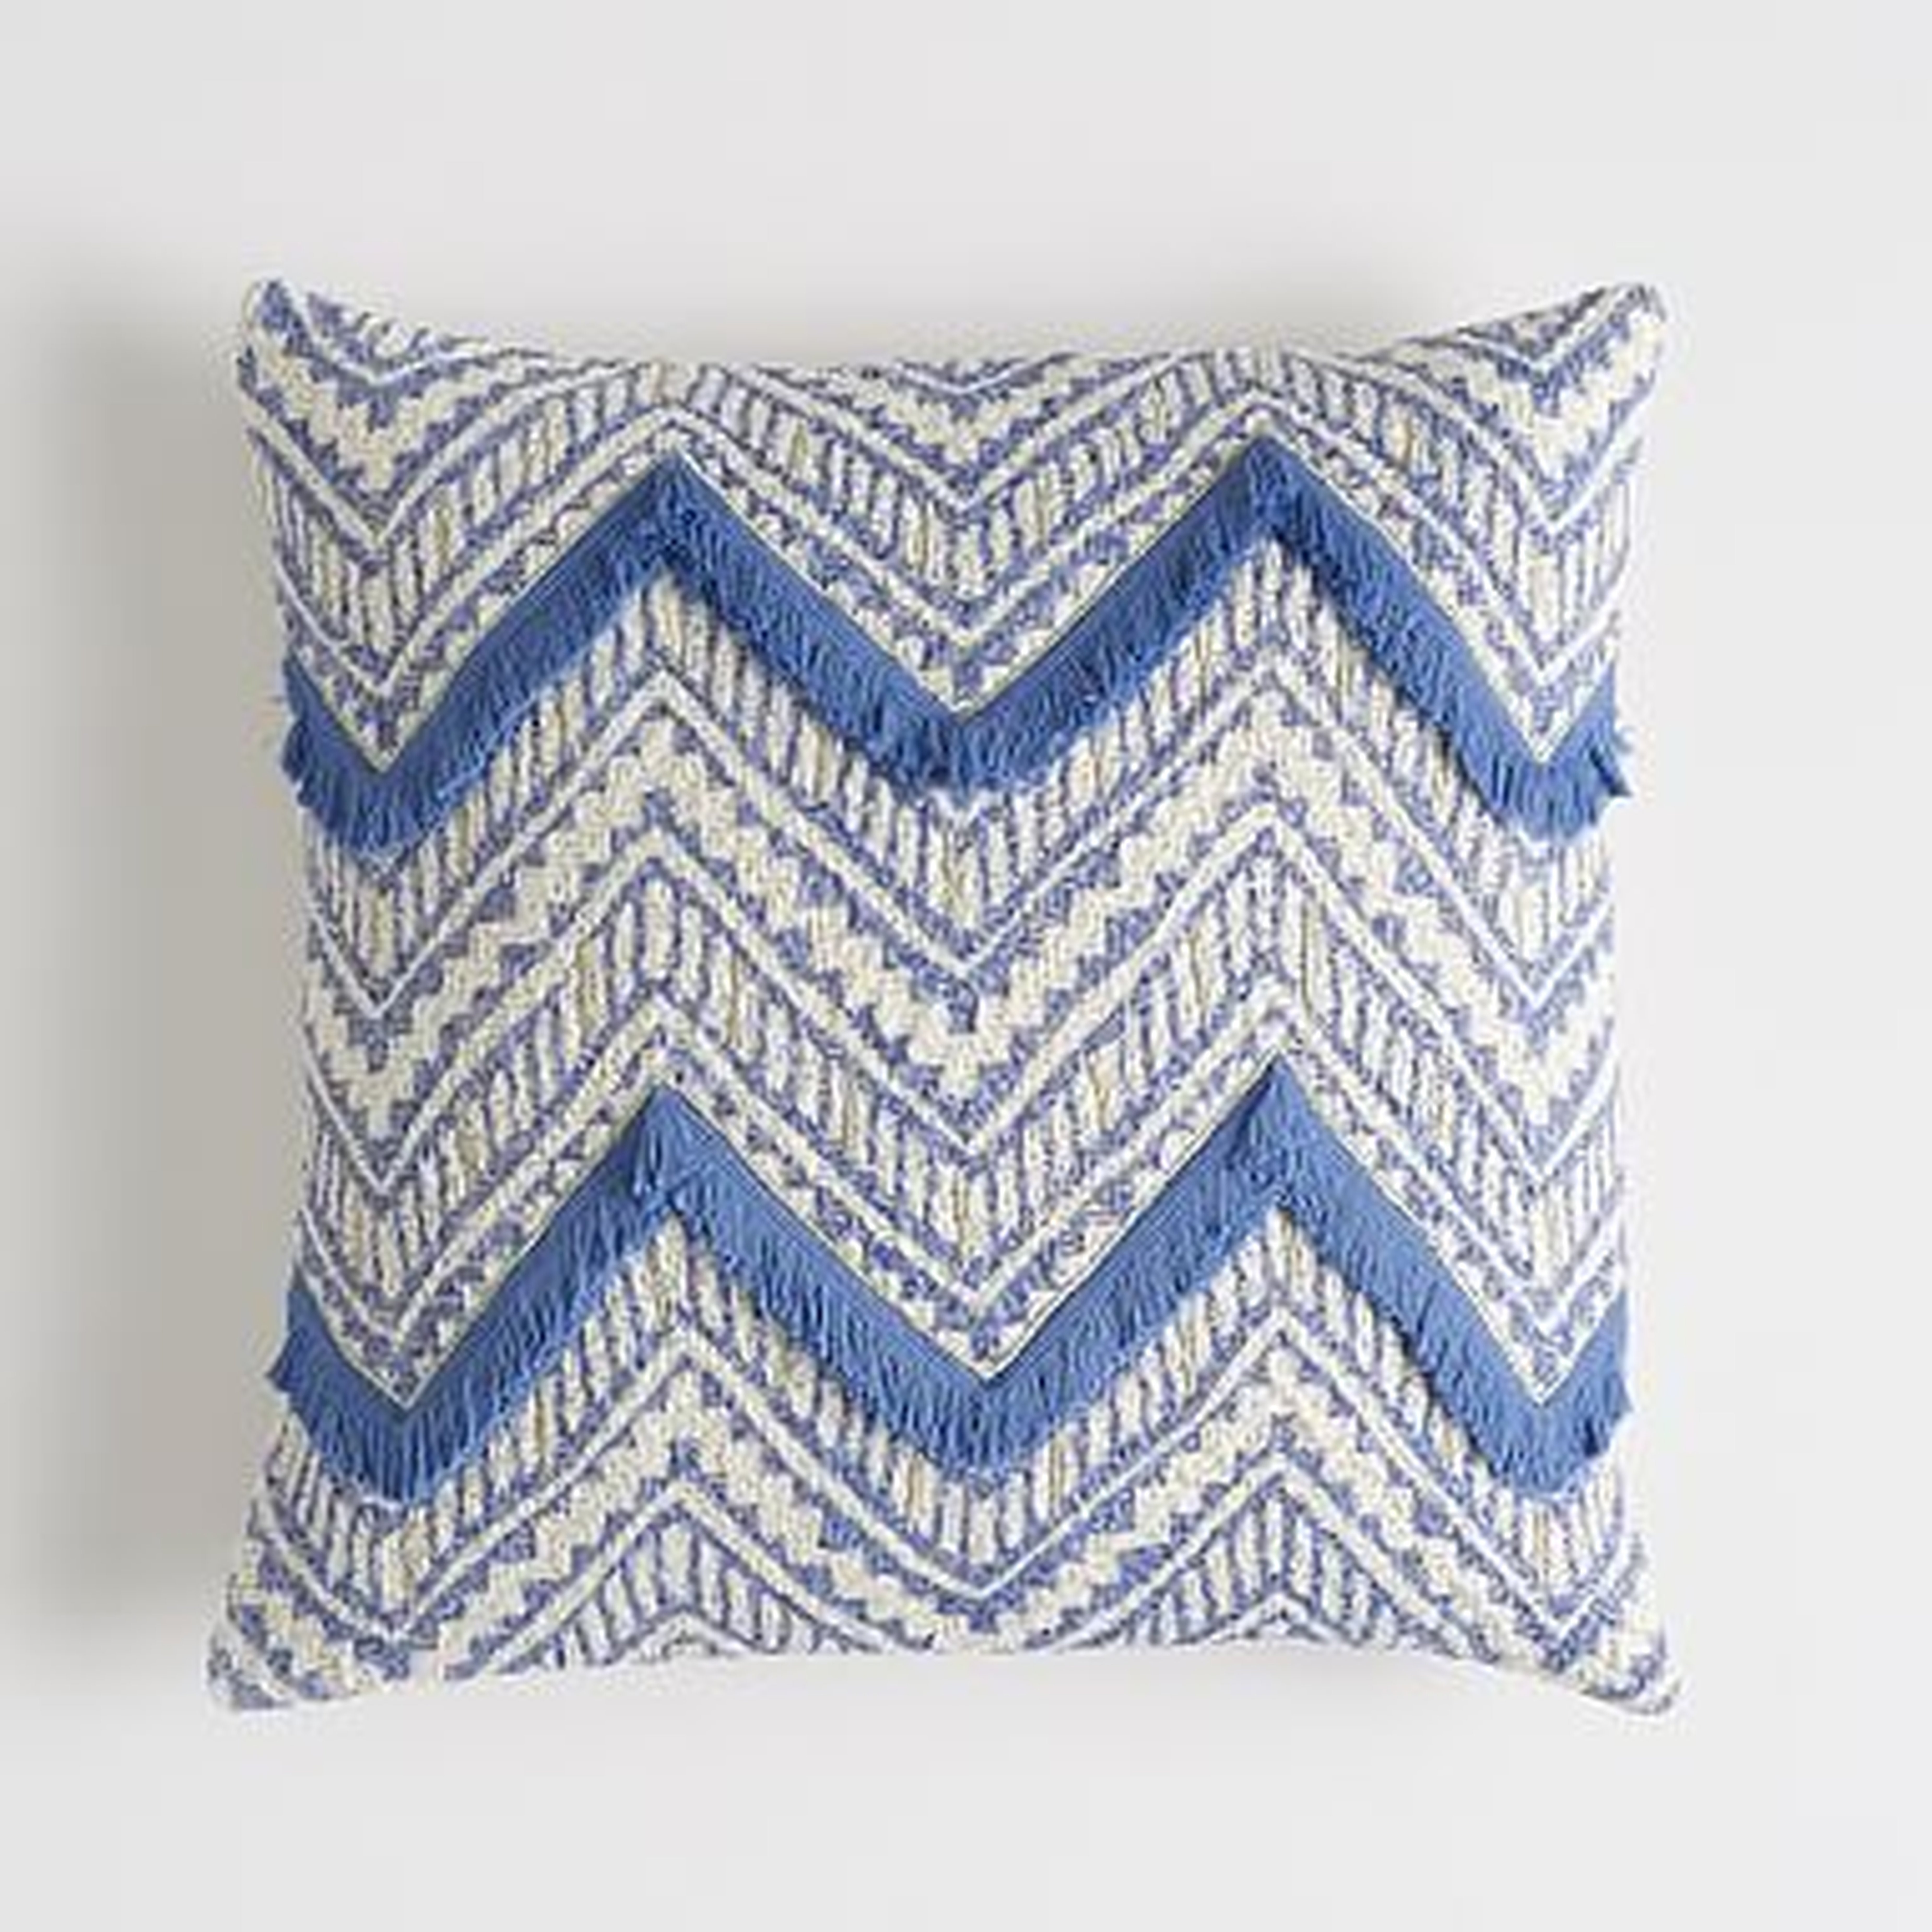 Woven Chevron Pillow Cover, 18"x18", Periwinkle - Pottery Barn Teen